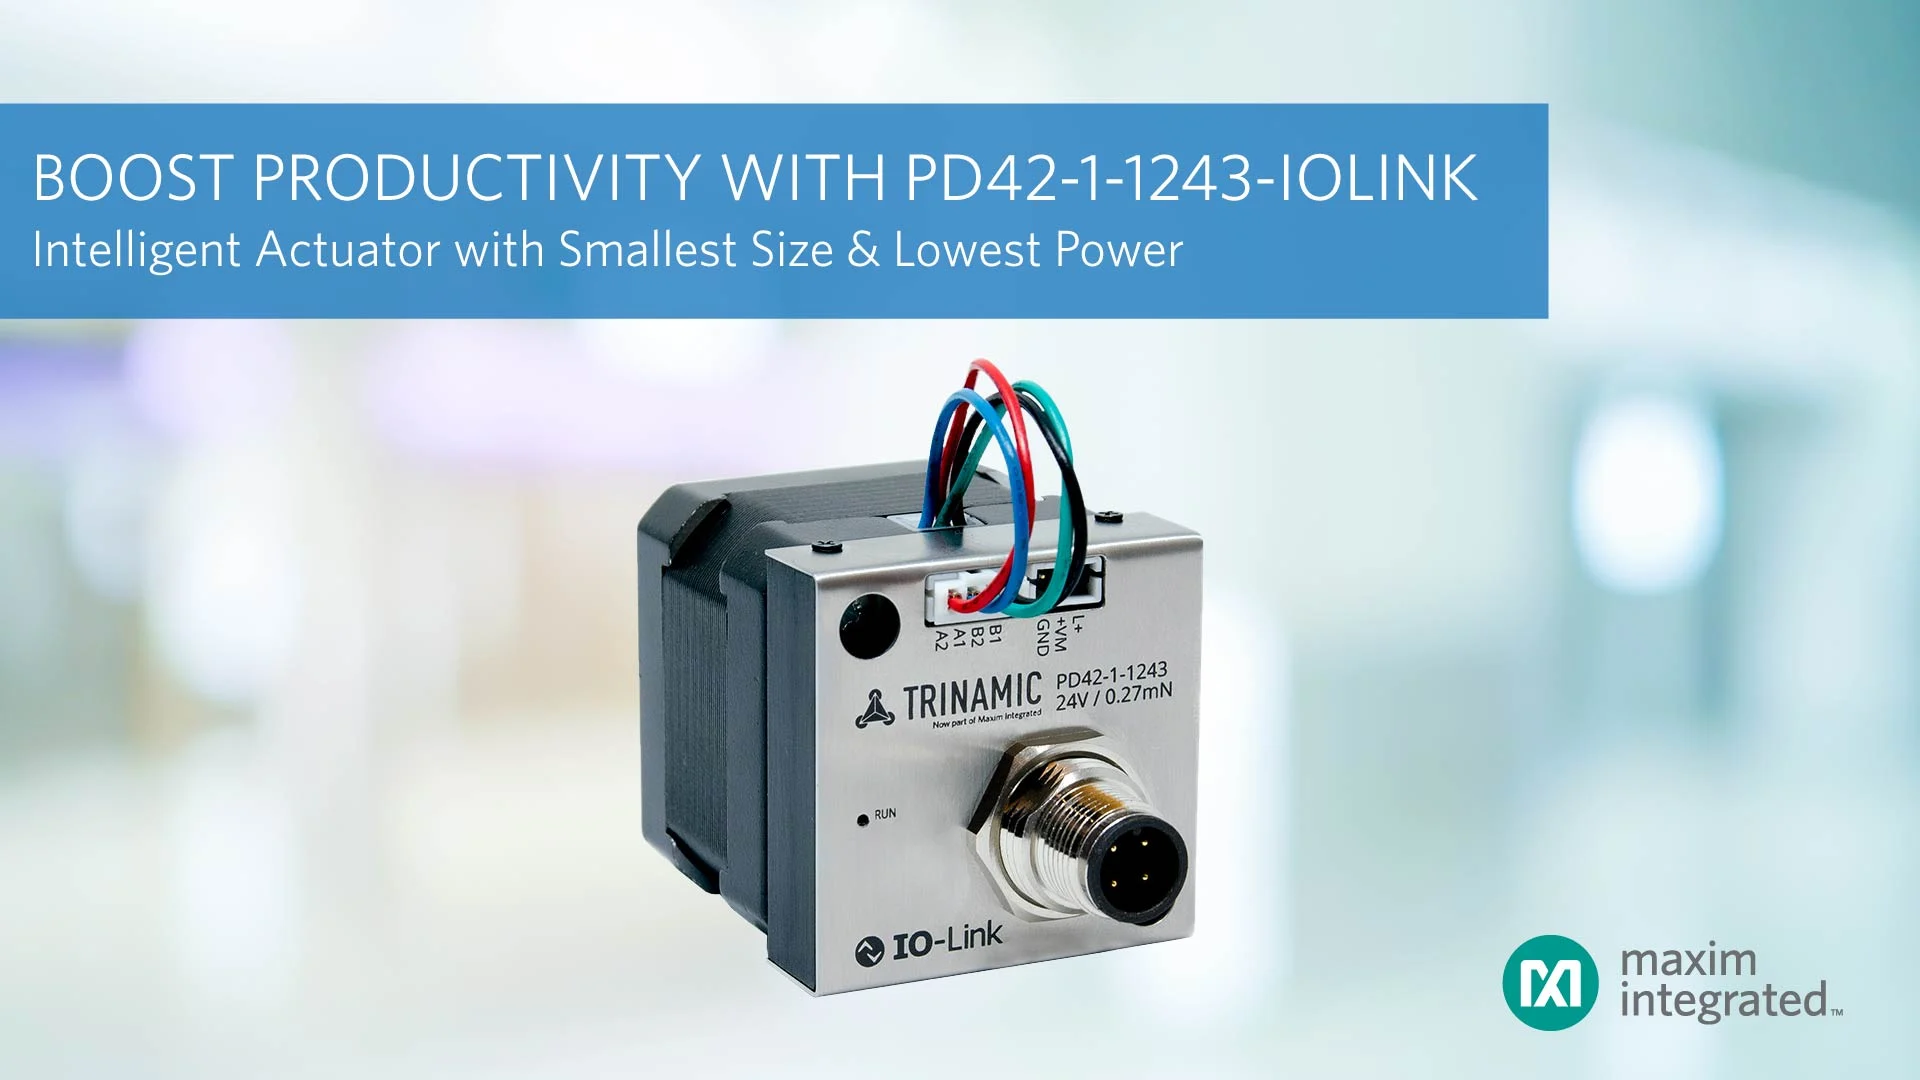 The Industry's Smallest, Lowest-Power Intelligent Actuator